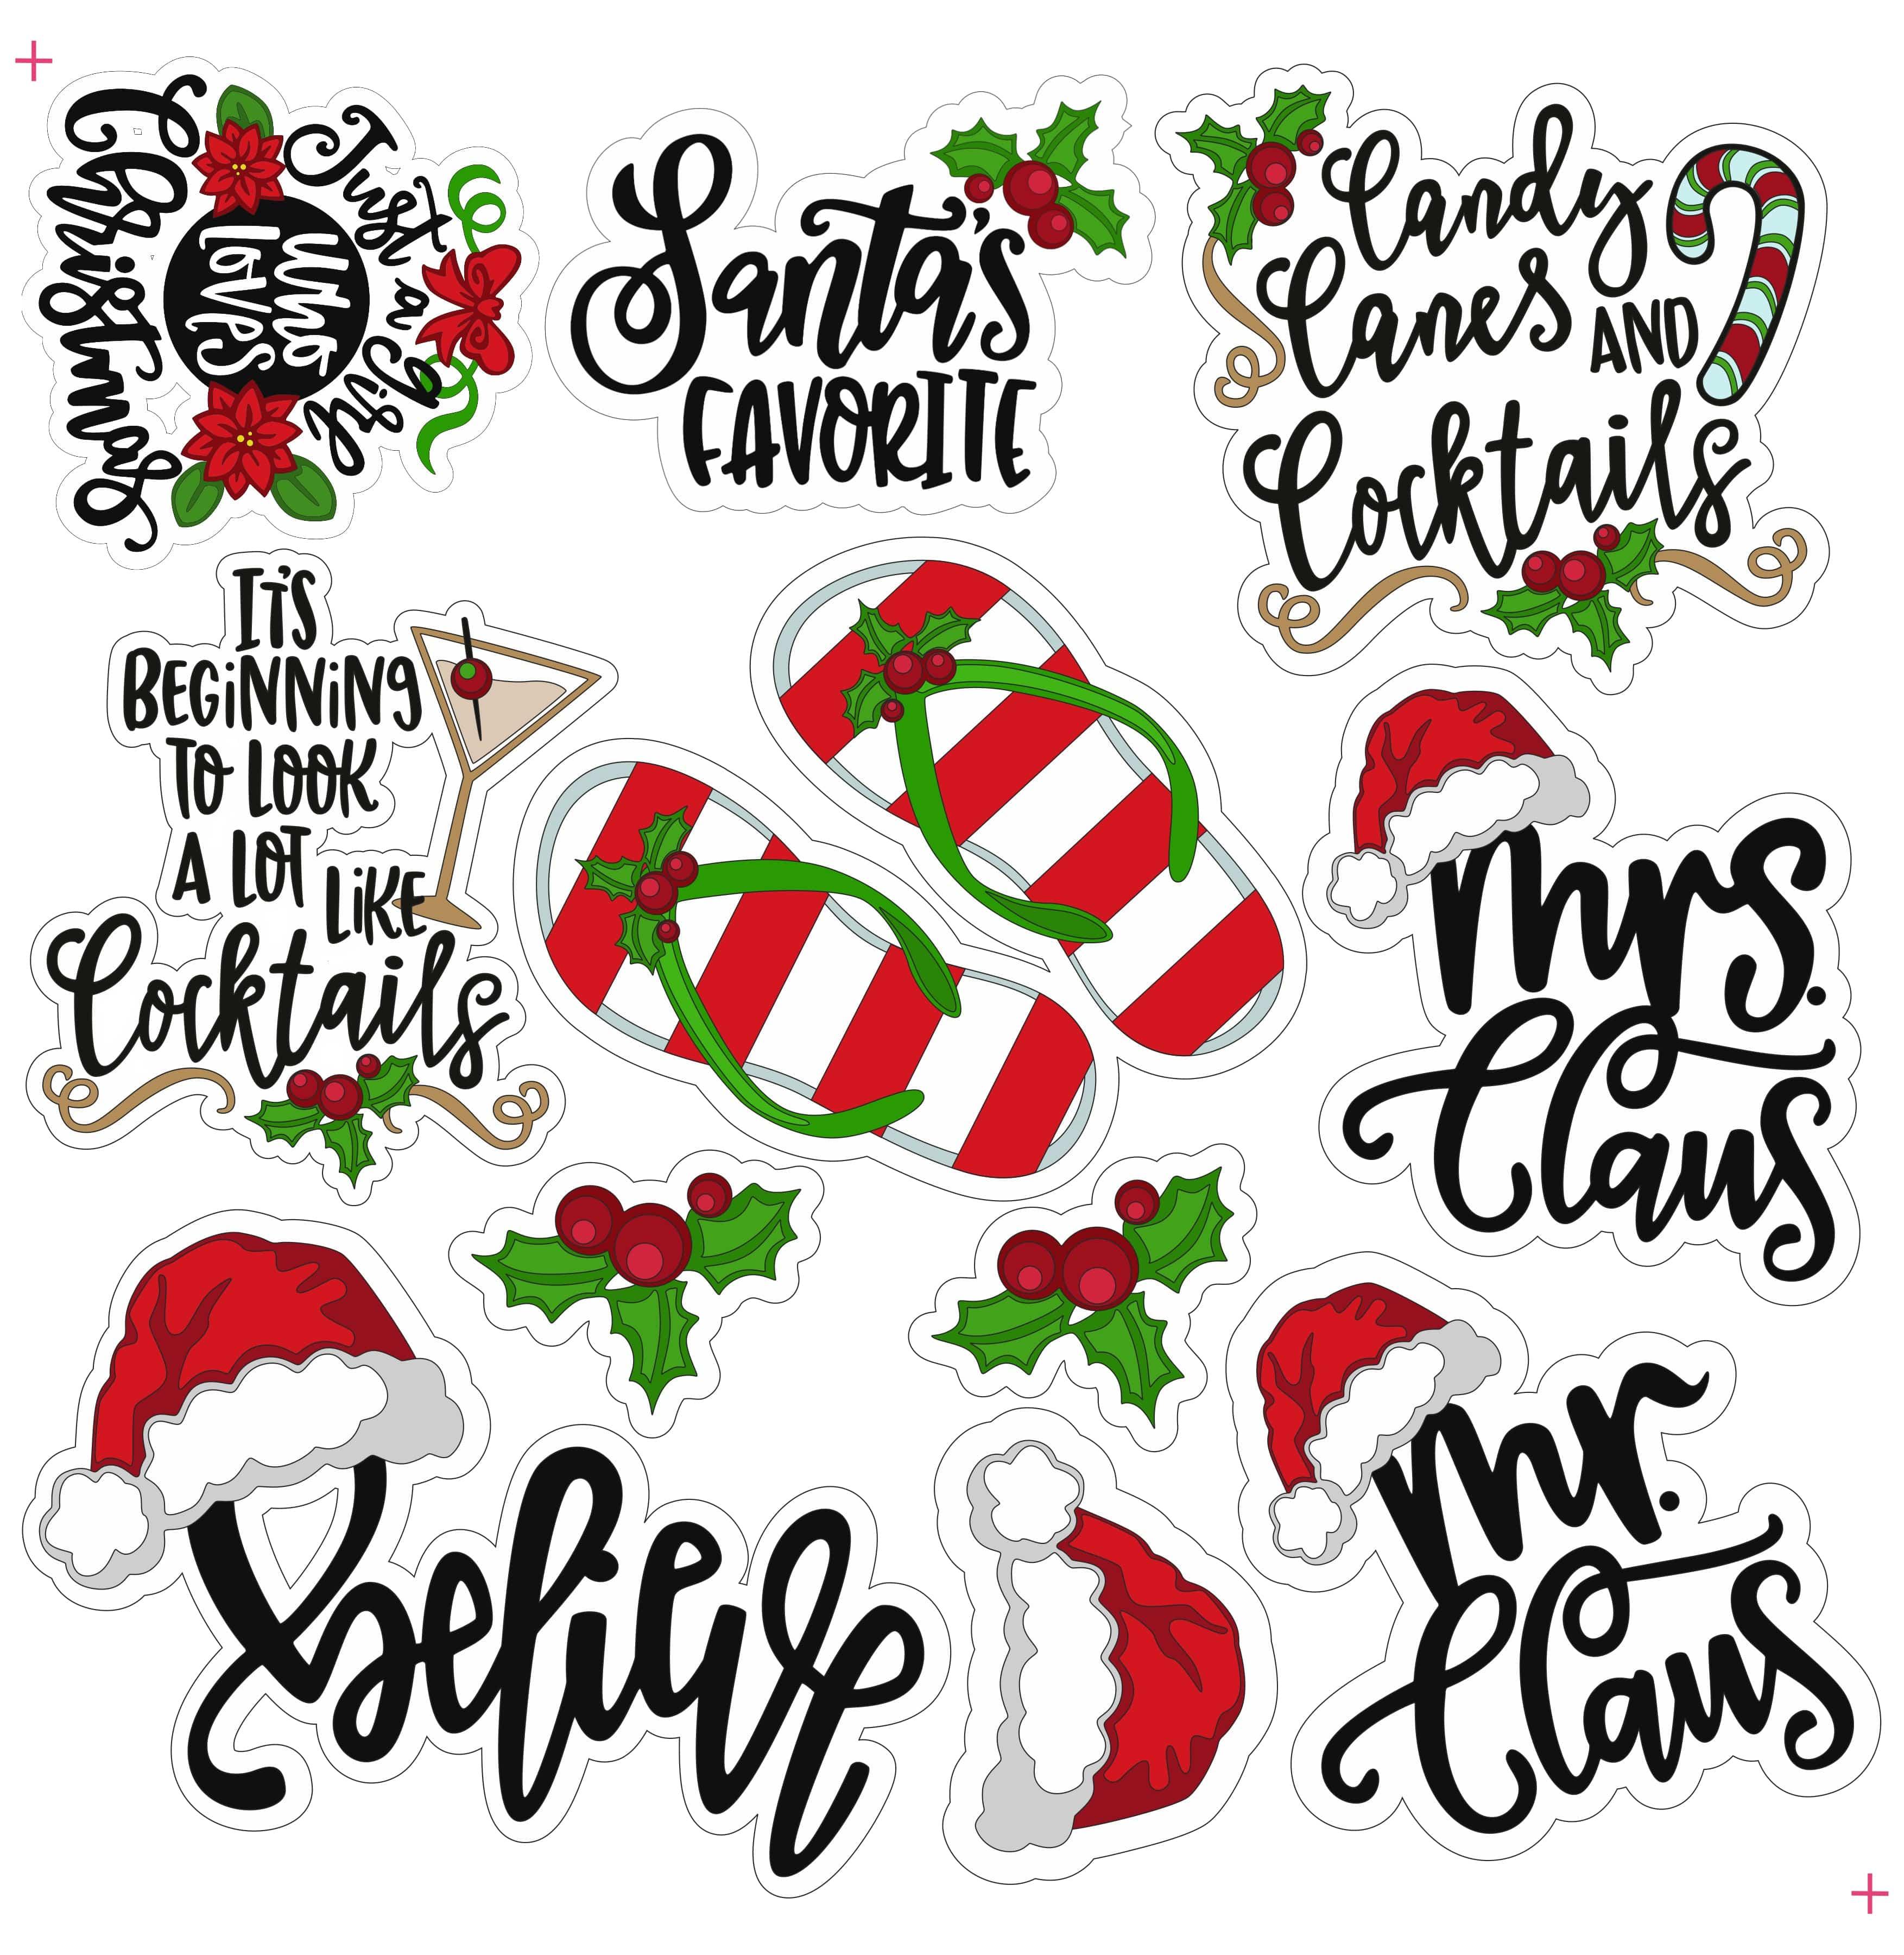 Quirky Quotes Collection Christmas Cocktail Sayings Laser Cut Scrapbook or Card Embellishments by SSC Laser Designs - 11 Pieces